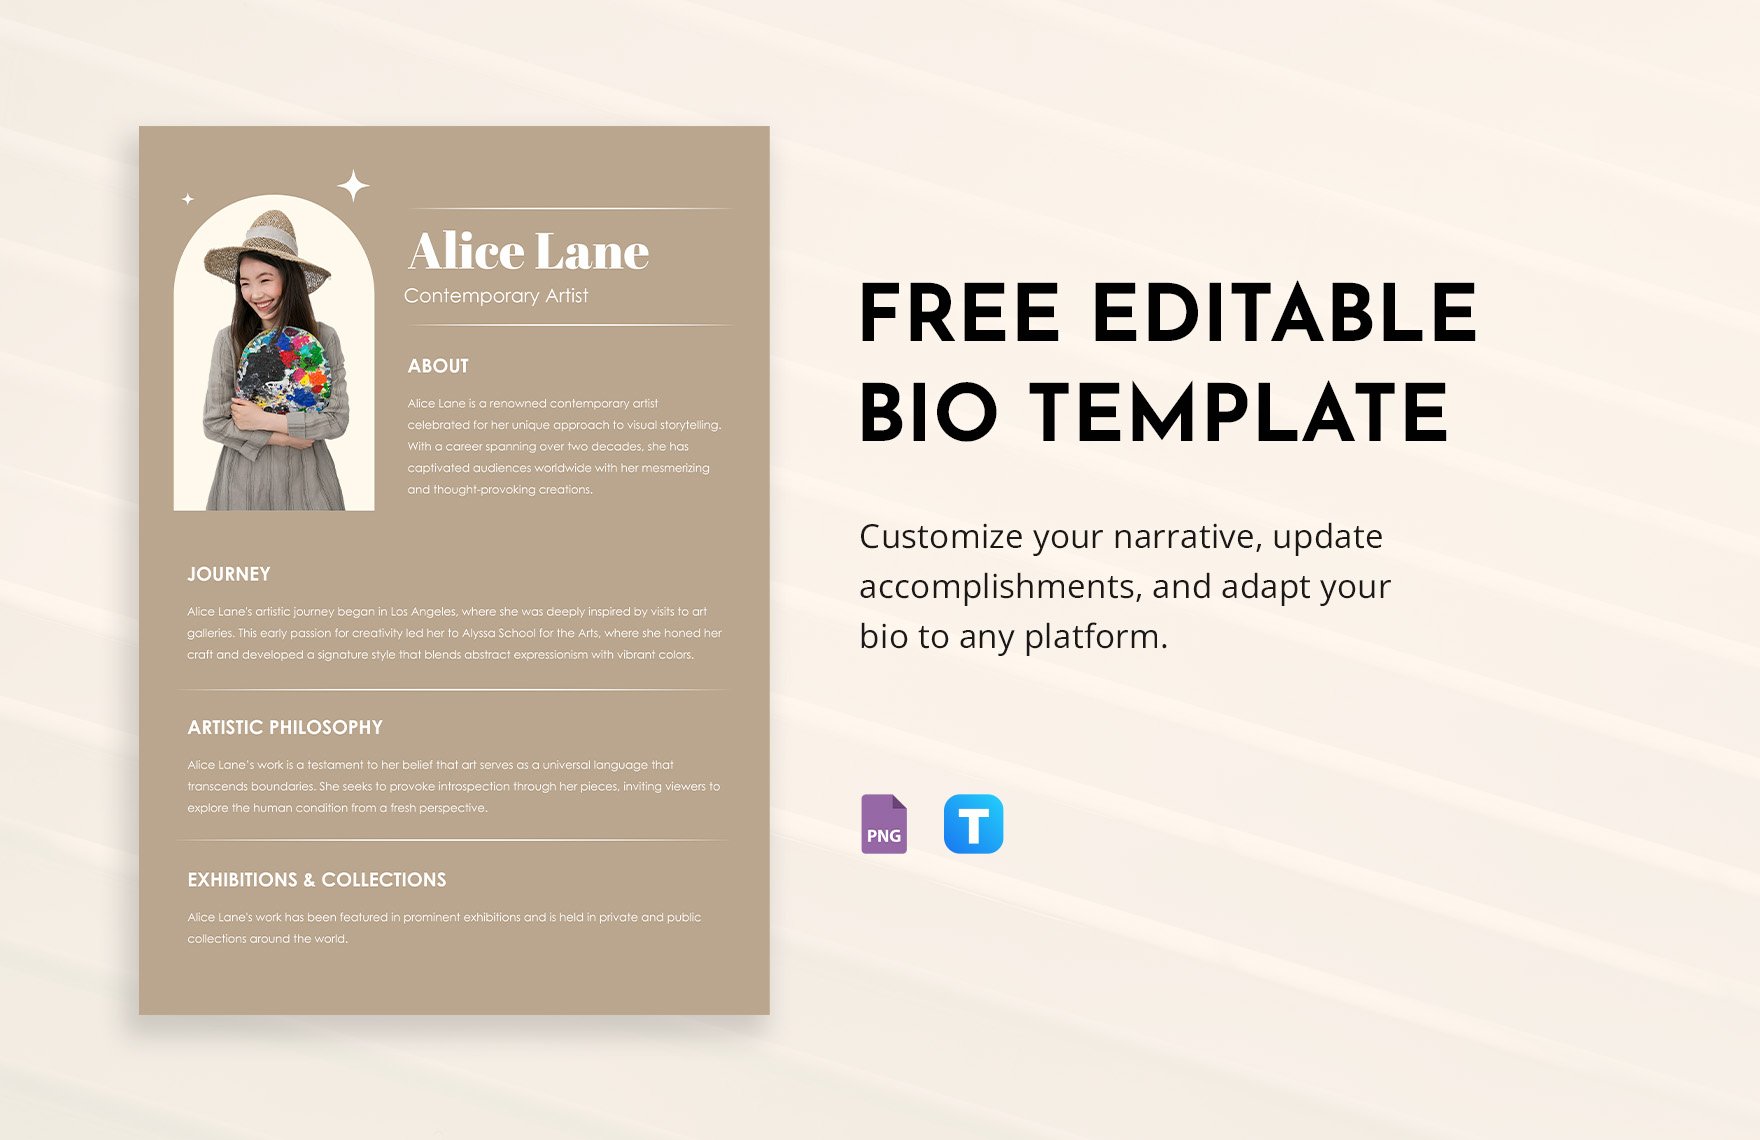 Free Editable Bio Template in PNG